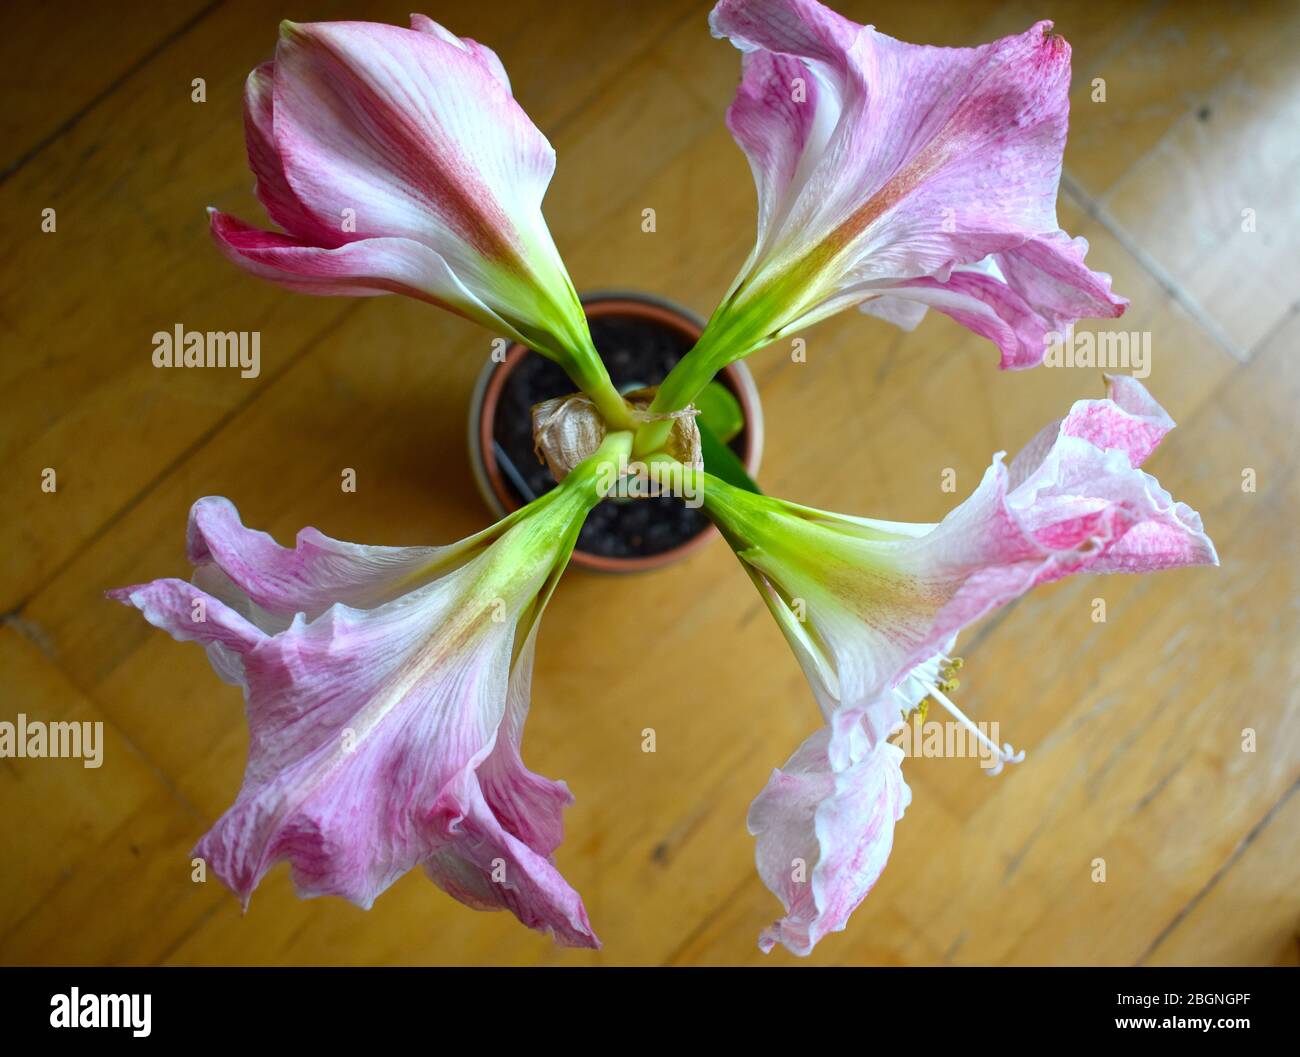 Amaryllis lily is a sure bloomer for 10 months out of the year. Four on stem soft striped pink blooms Plant should be kept away from pets and children Stock Photo